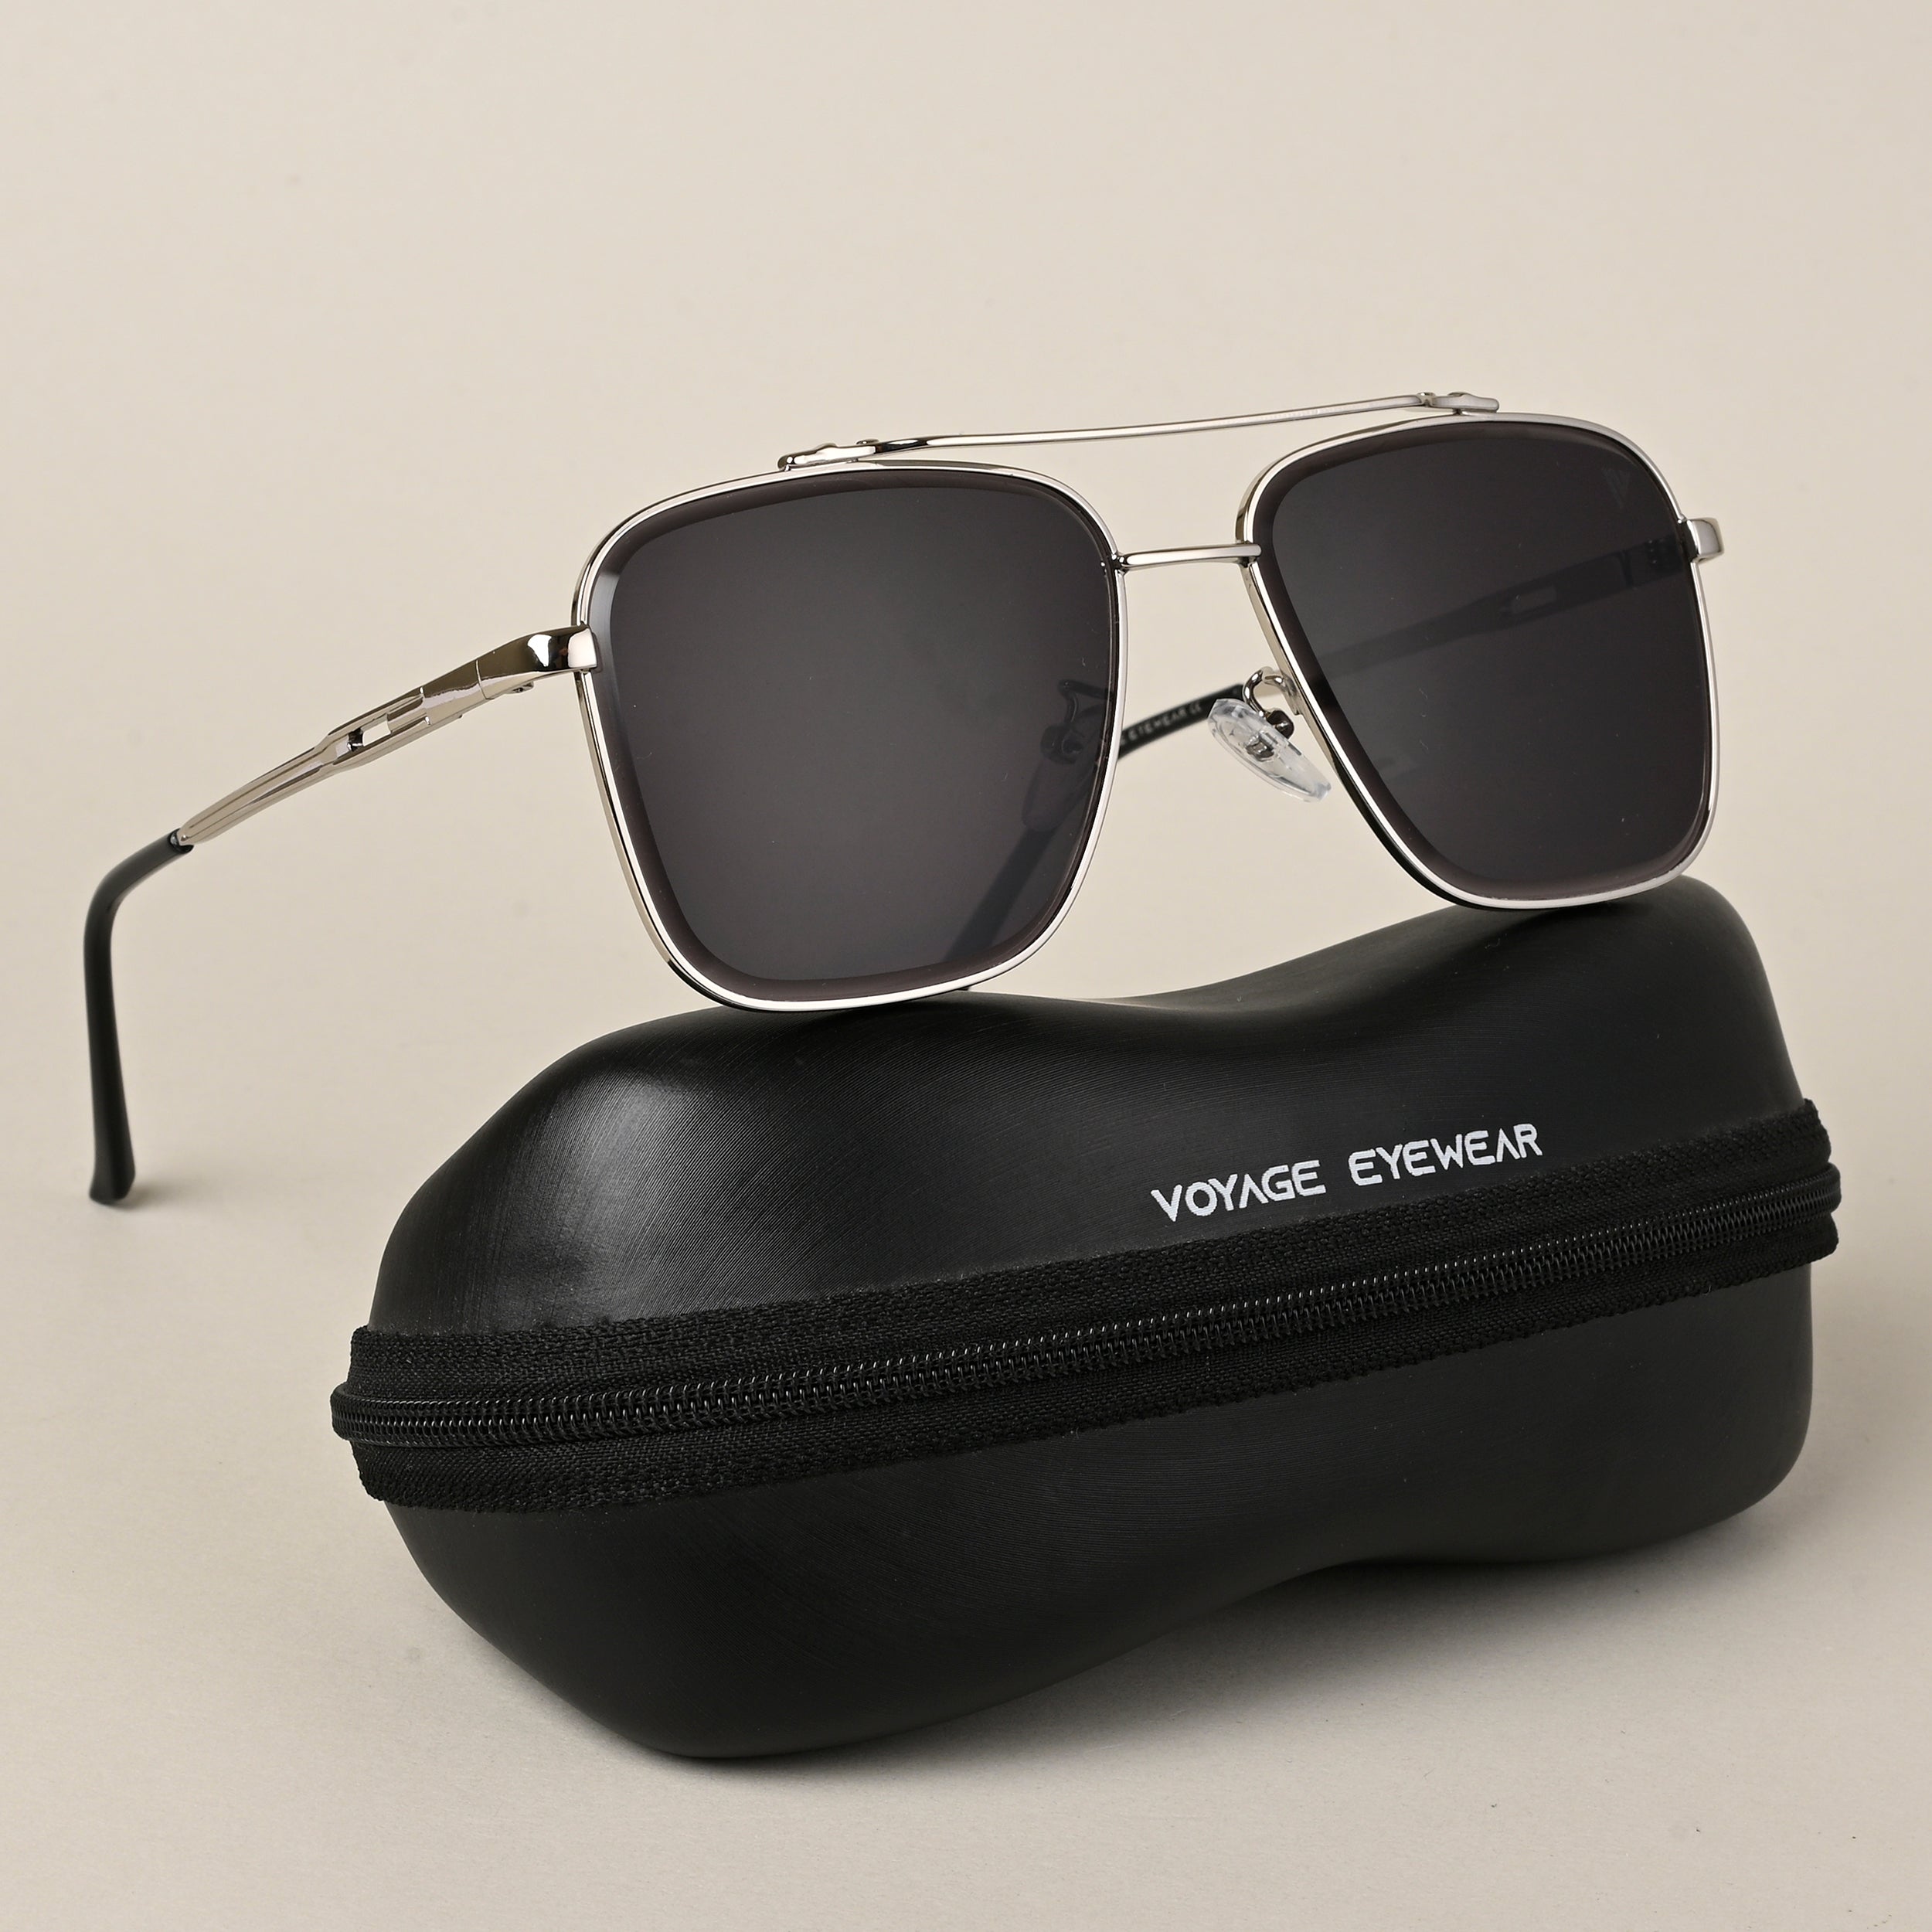 Voyage Exclusive Black and Grey Polarized Round Sunglasses for Men & Women  - PMG3982